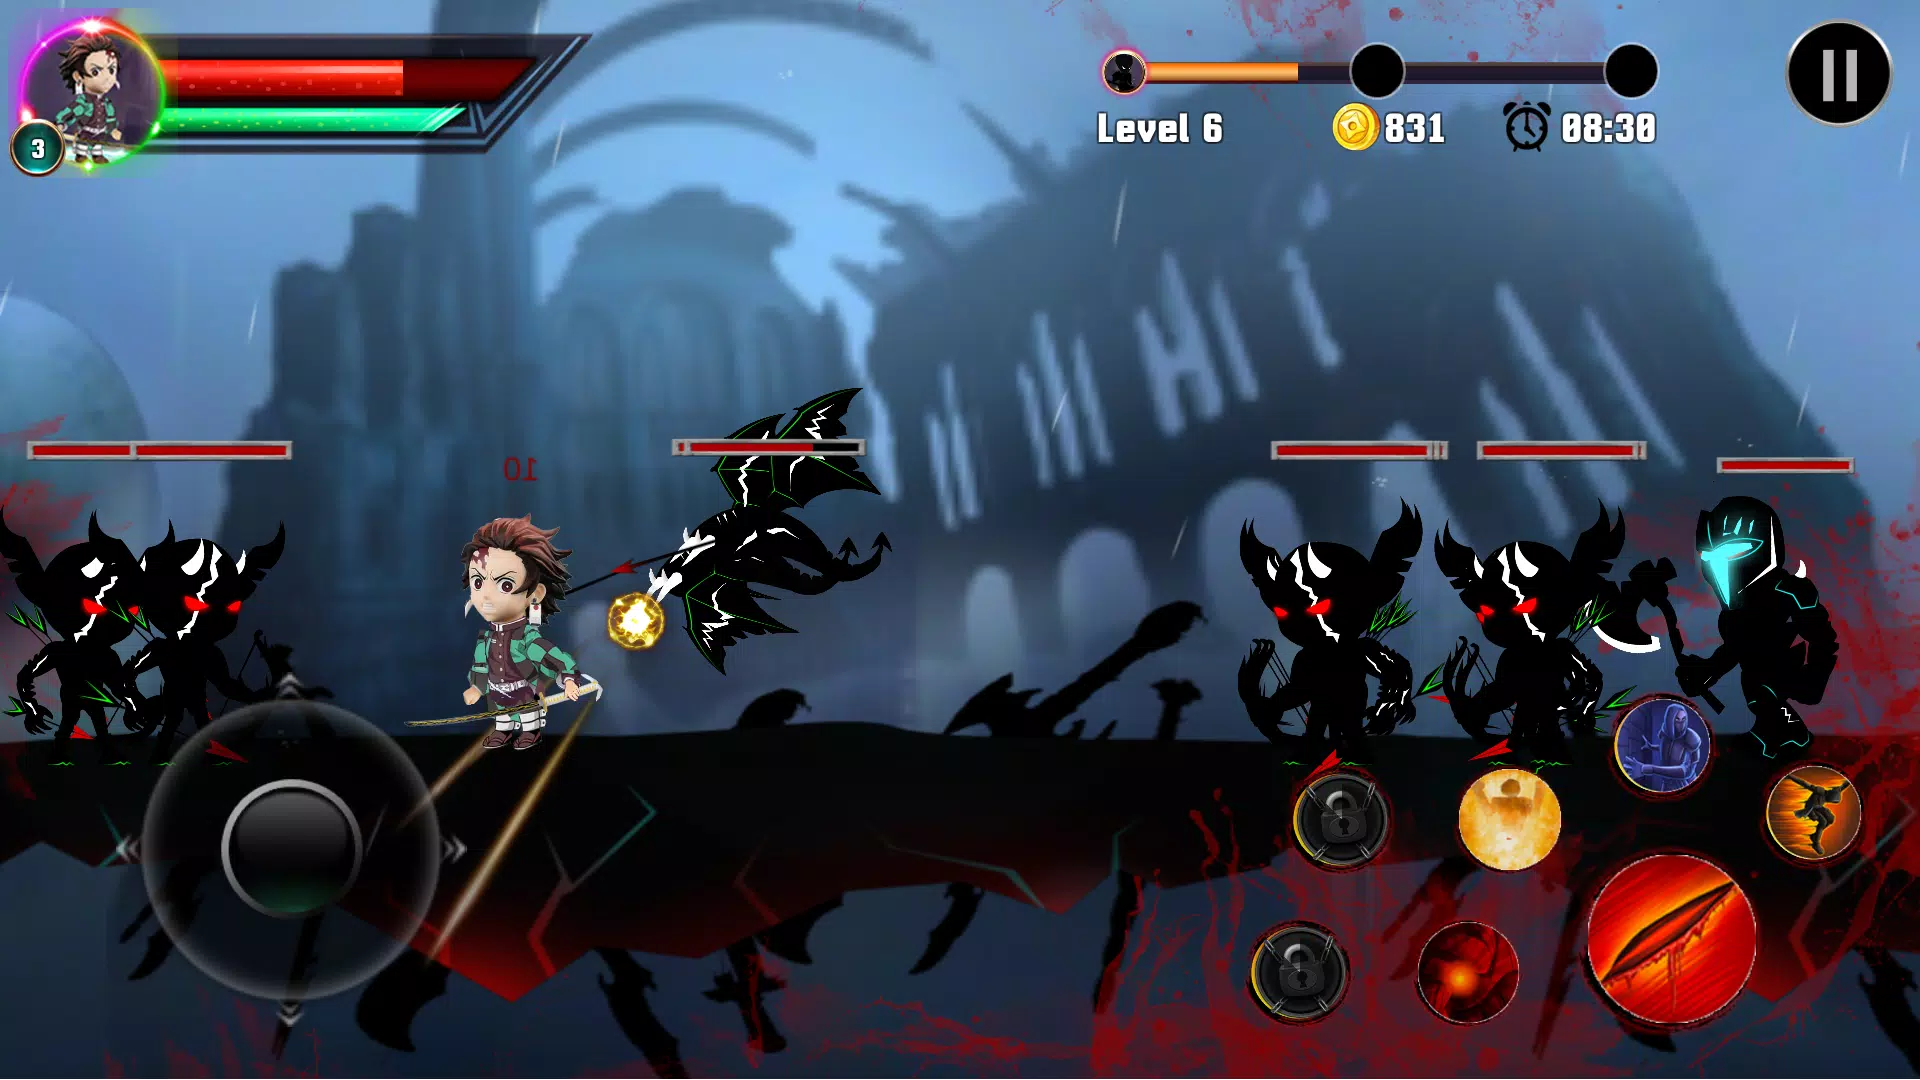 Zenitsu's oni Defence!(Demon Slayer fan game) - APK Download for Android